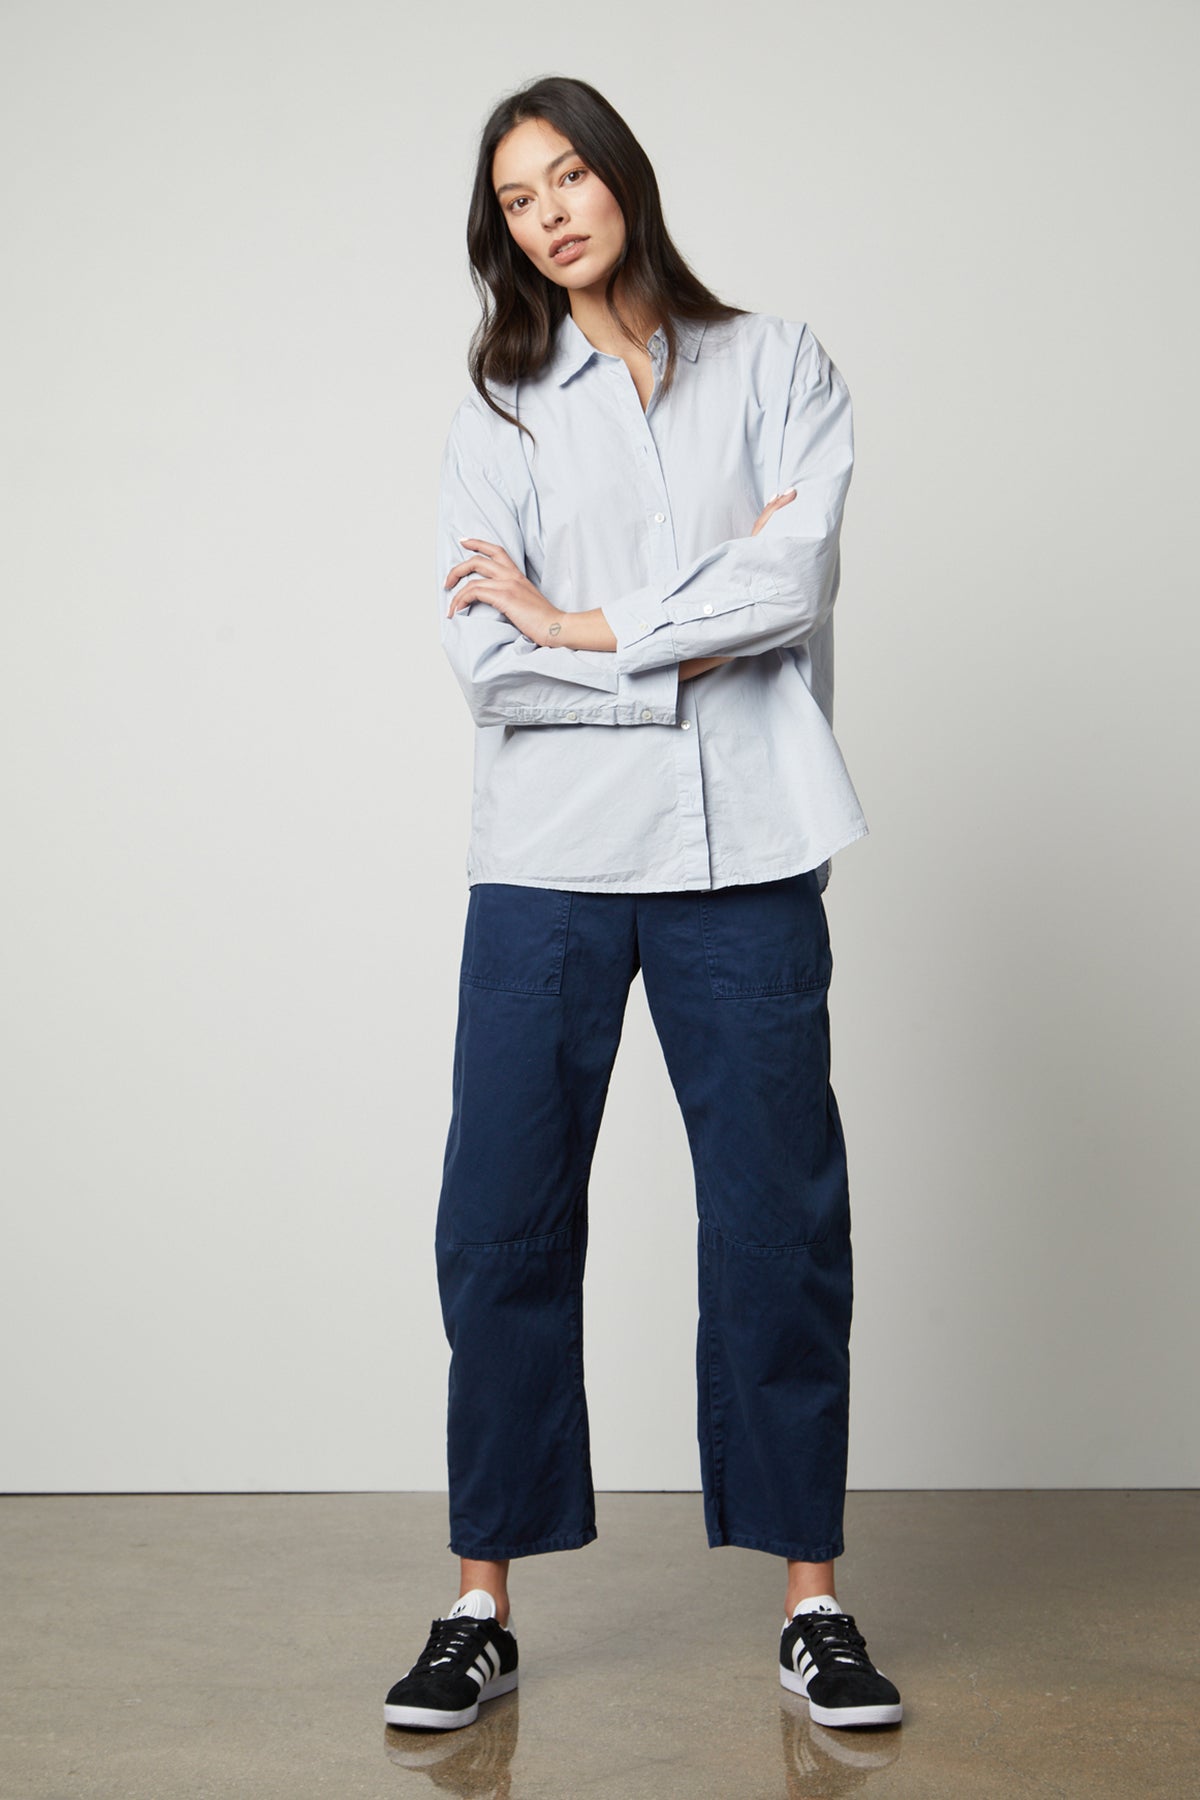 The model is wearing a Velvet by Graham & Spencer BRYLIE SANDED TWILL UTILITY PANT and blue shirt.-36118556147905